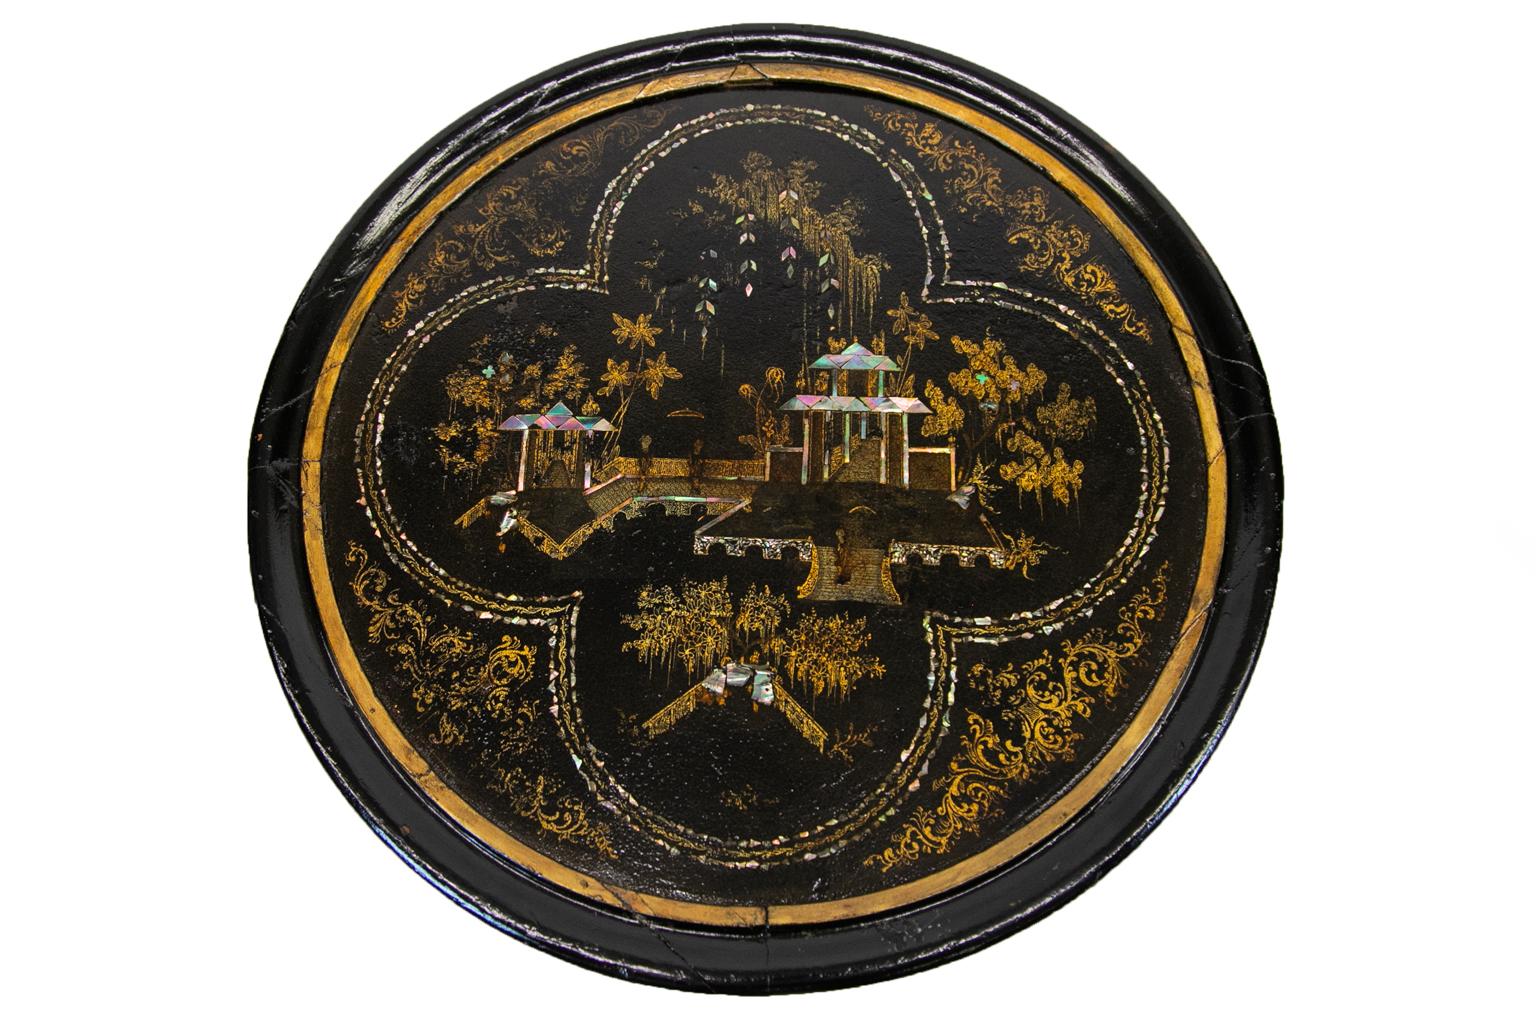 Lacquer occasional table has highlights of gilt arabesques that surround a quatrefoil center panel framed with mother of pearl inlay. This panel depicts a house with a stairway entrance and covered bridges with trees.